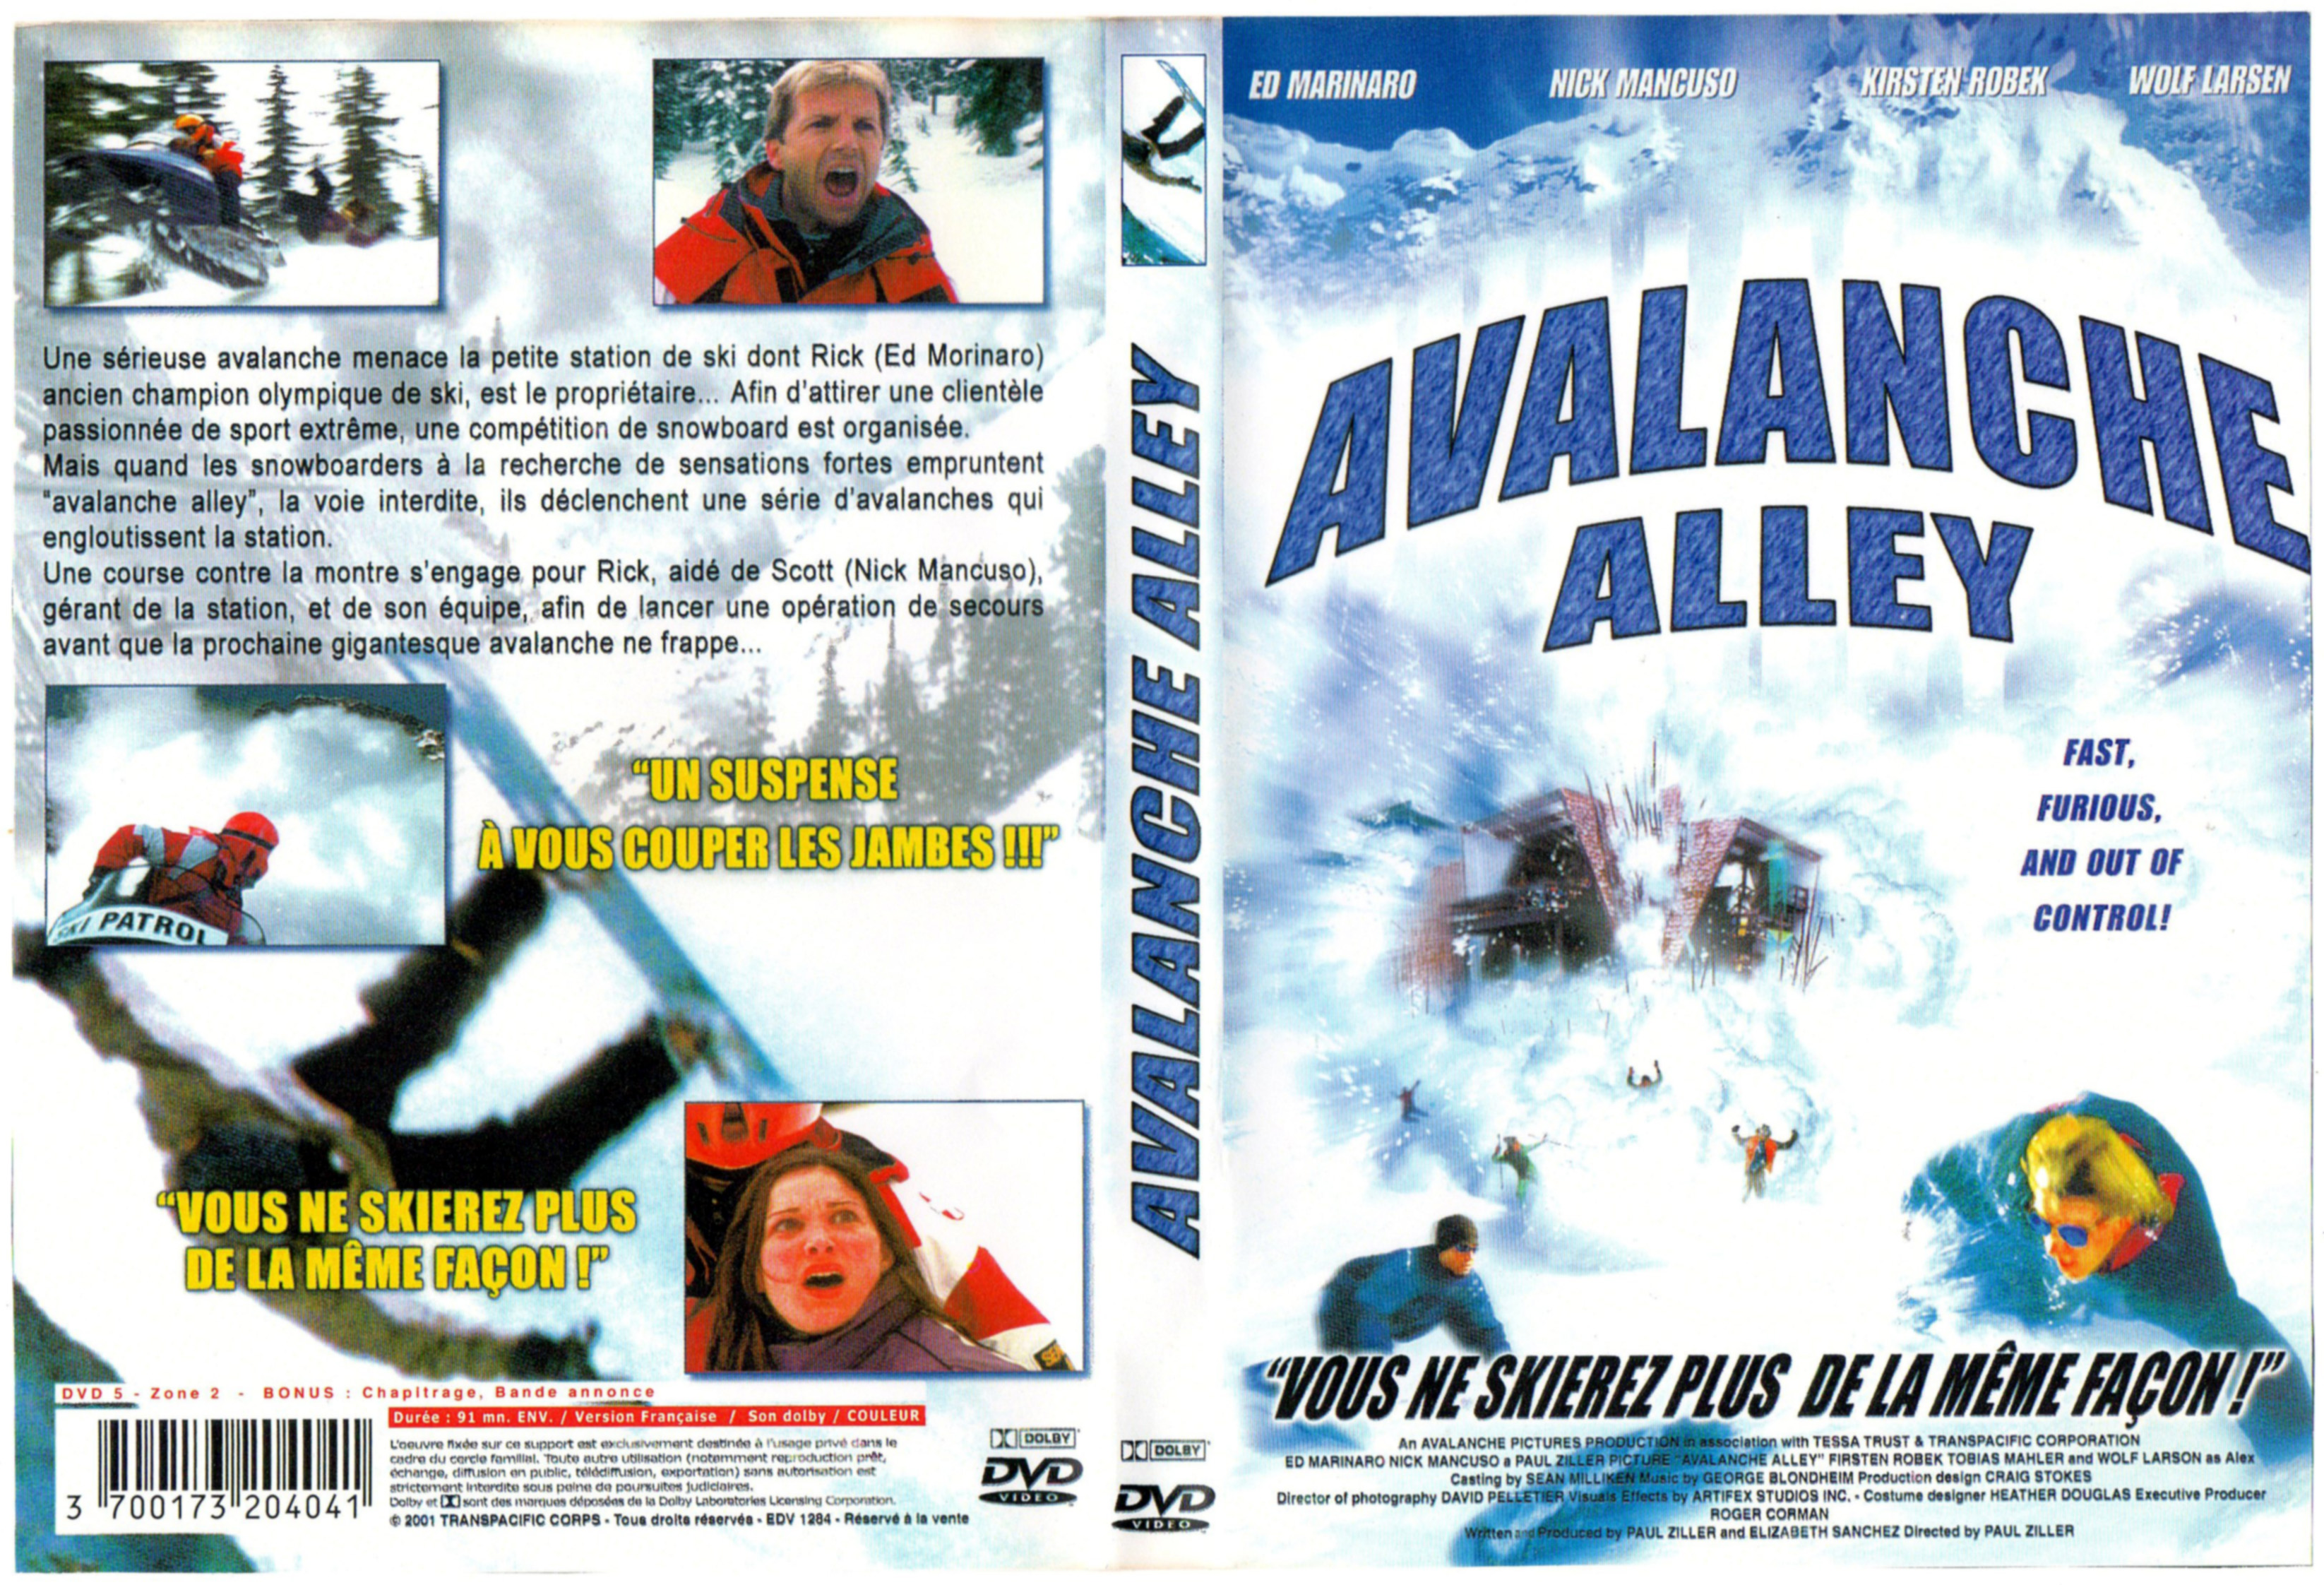 Jaquette DVD Avalanche Alley